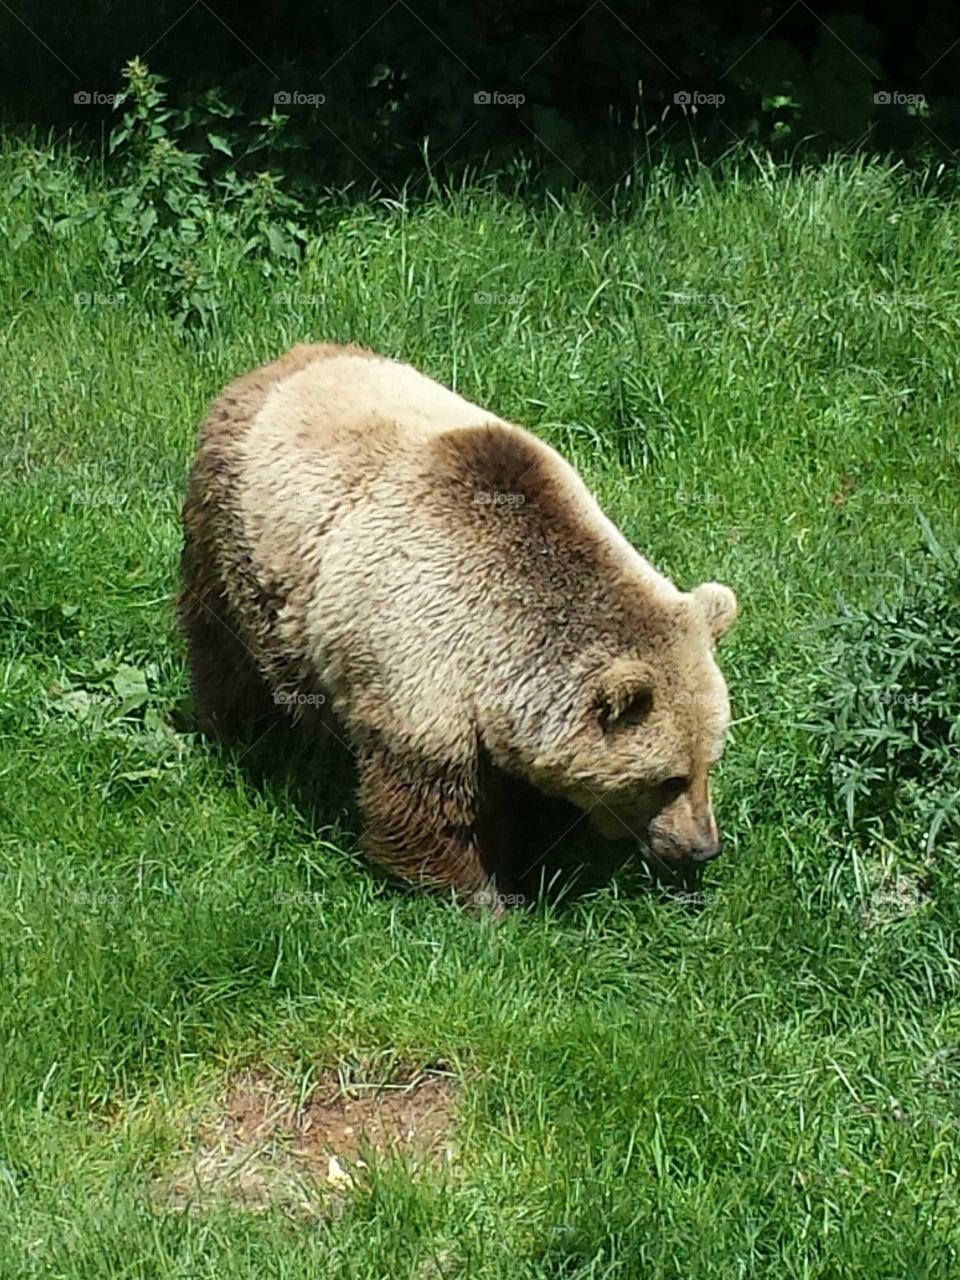 Just a Brown Bear munching on the Grass